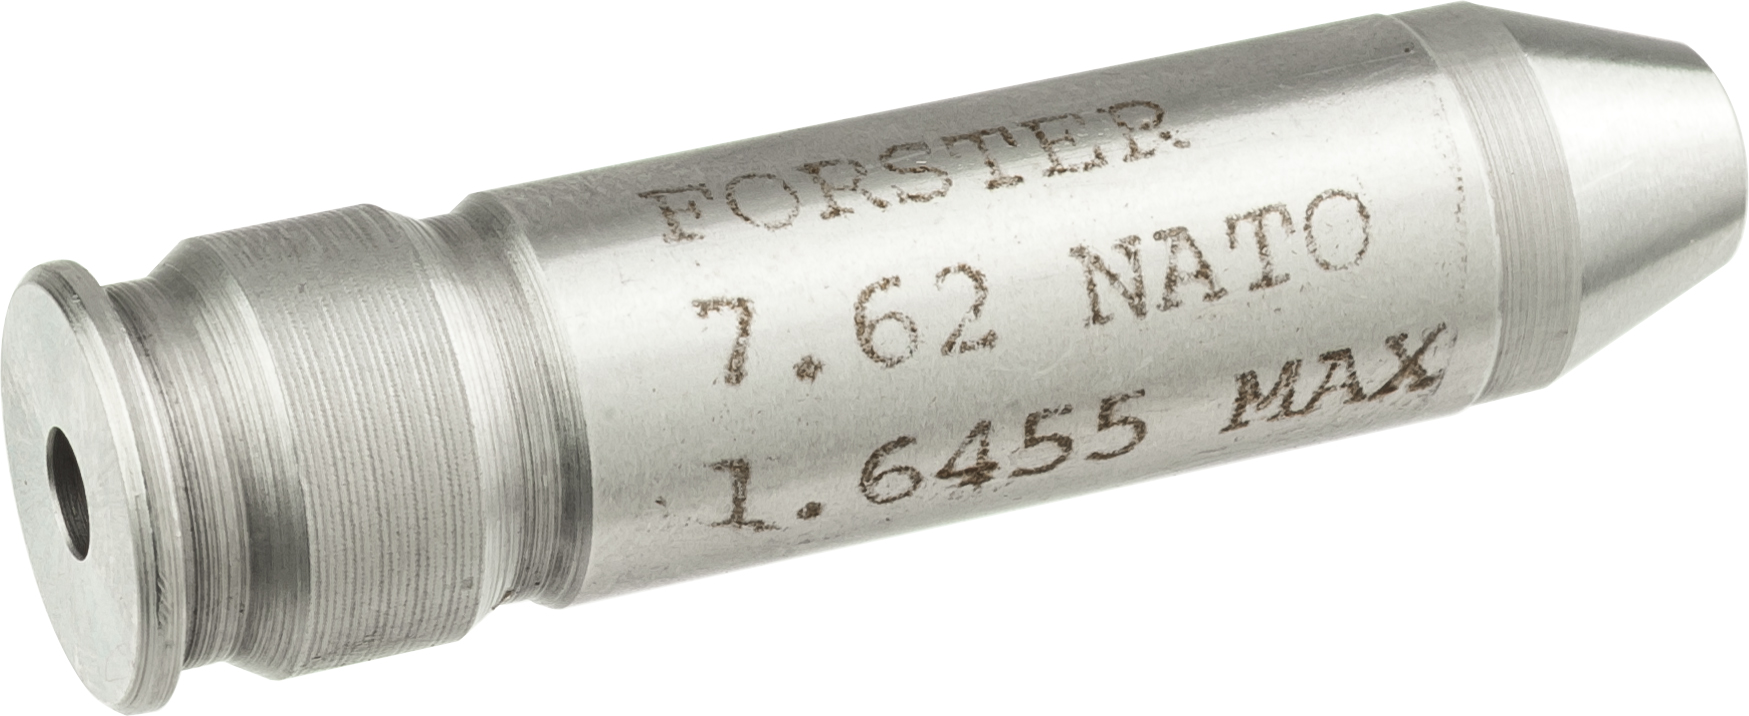 FORSTER HEADSPACE GAGE FOR 762 NATO MAXIMUM MFG#HG762NATOMAX 